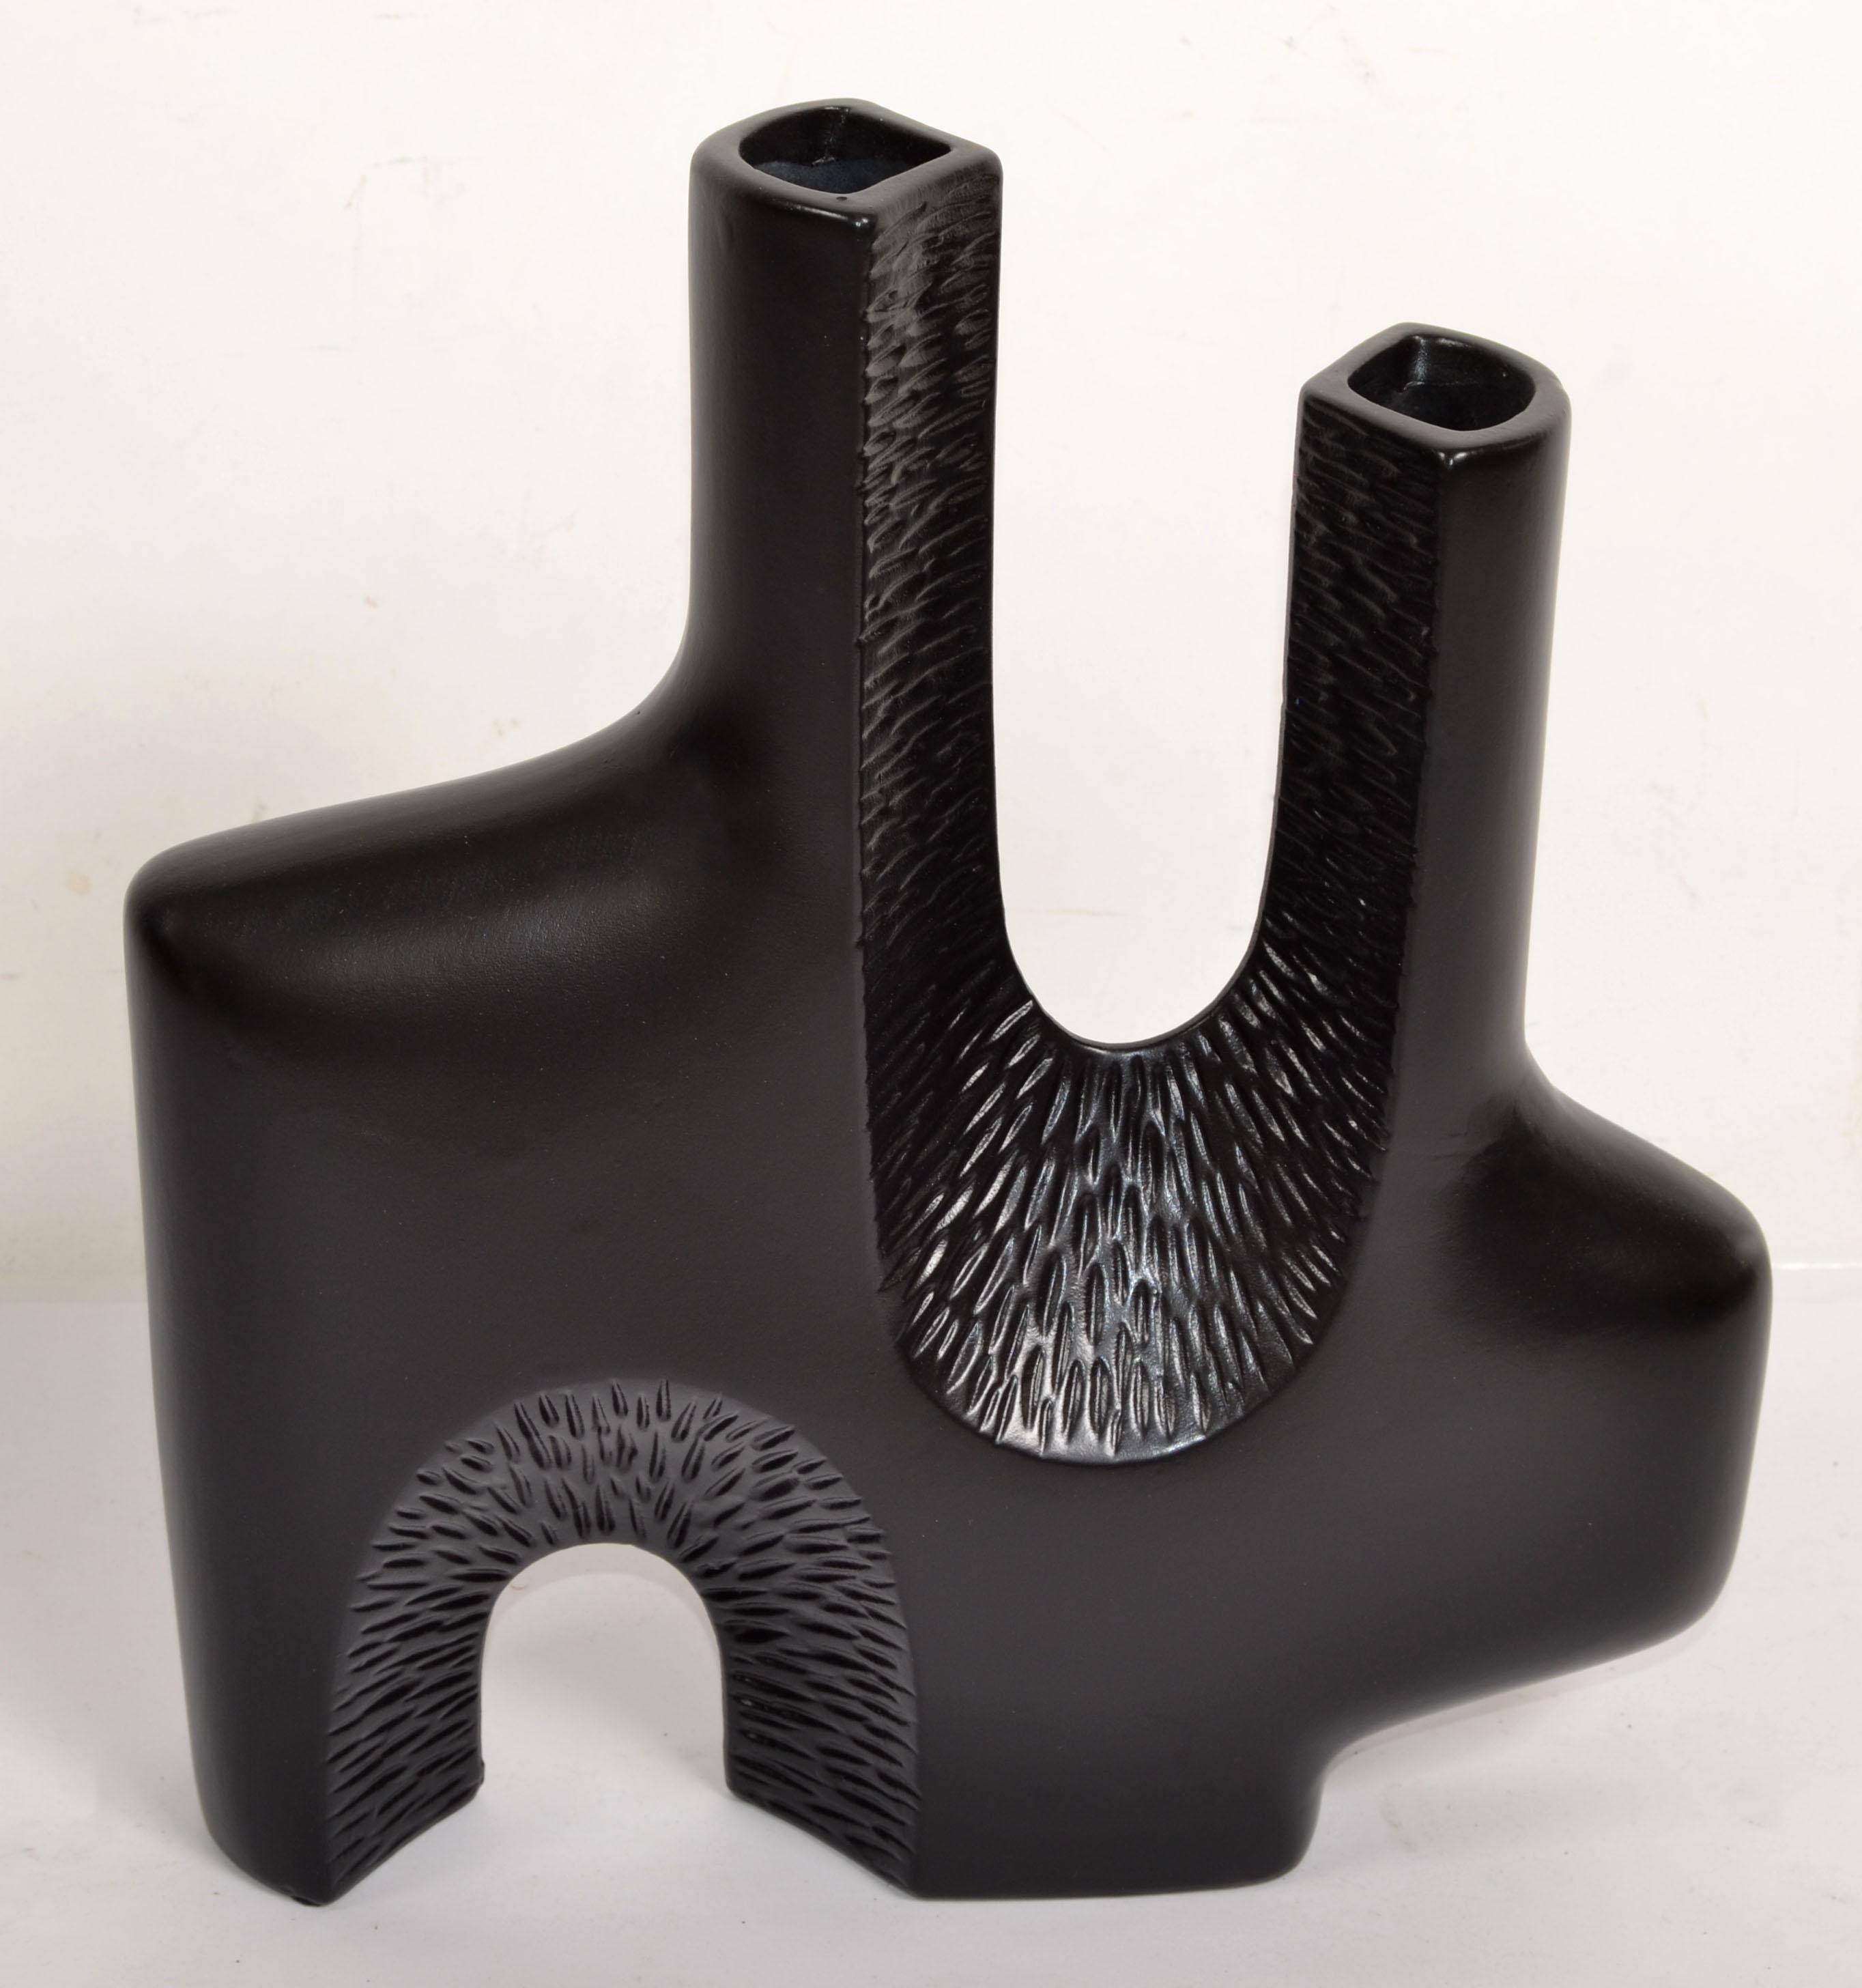 1980s Organic Modern textured Ceramic Vase Studio Piece in matte black finish in the Style of Valentine Schlegel.
A two neck Vessel for Flowers, Ferns or Silk Flower Decoration.
Great Craftsmanship to display on Top of a Fireplace, Sideboard,